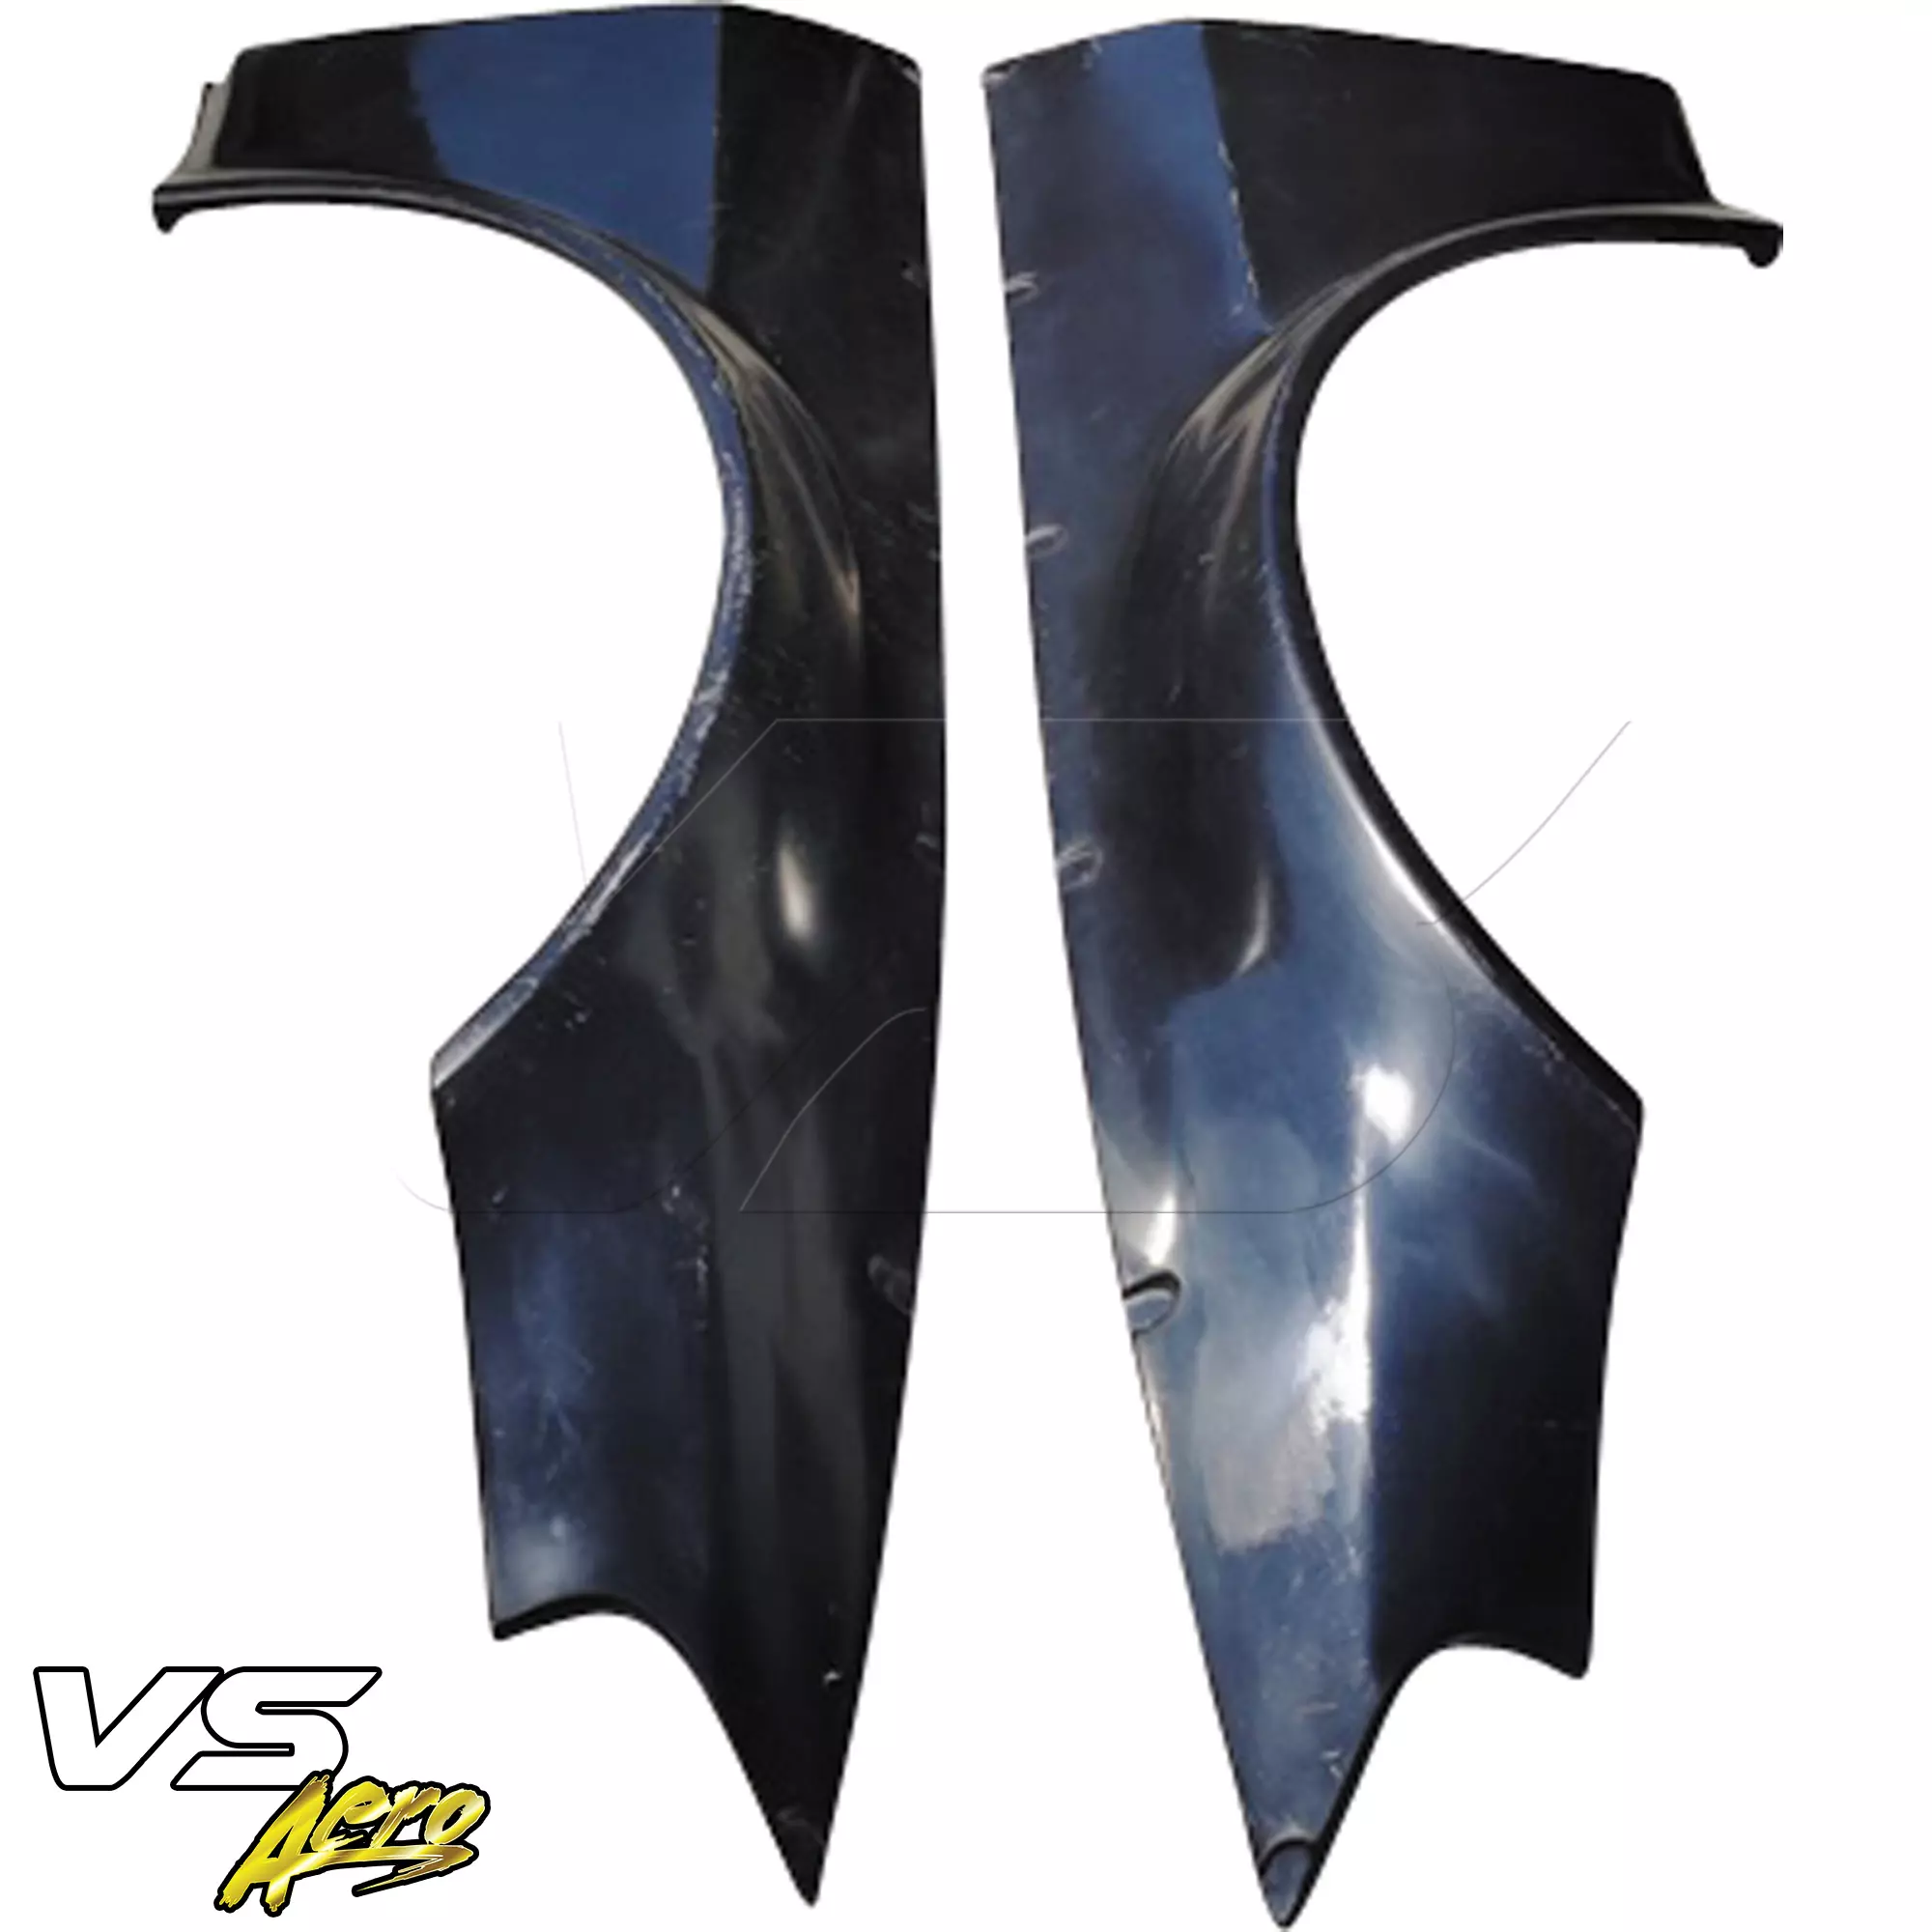 VSaero FRP TKYO Wide Body 65mm Fender Flares (front) > Nissan Skyline R33 1995-1998 > 2dr Coupe - Image 1